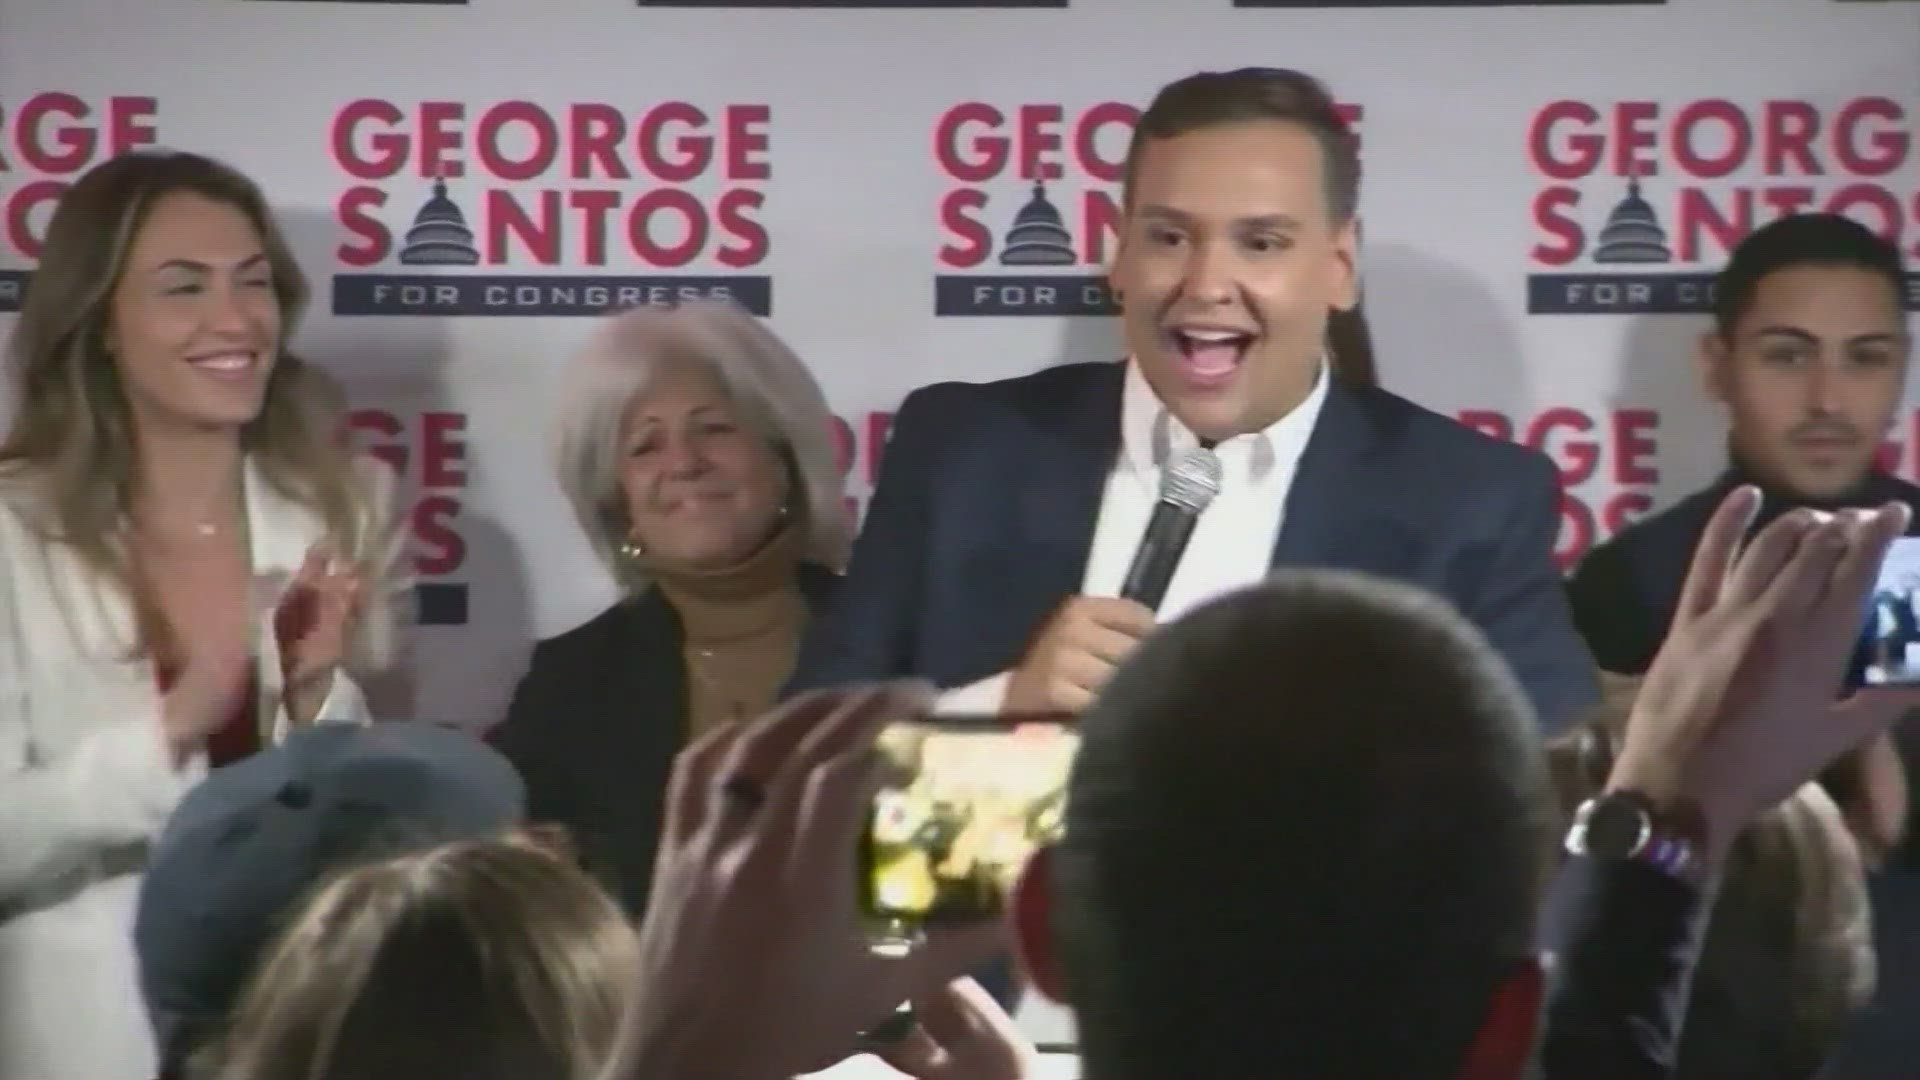 Rep. George Santos won't seek reelection after scathing ethics